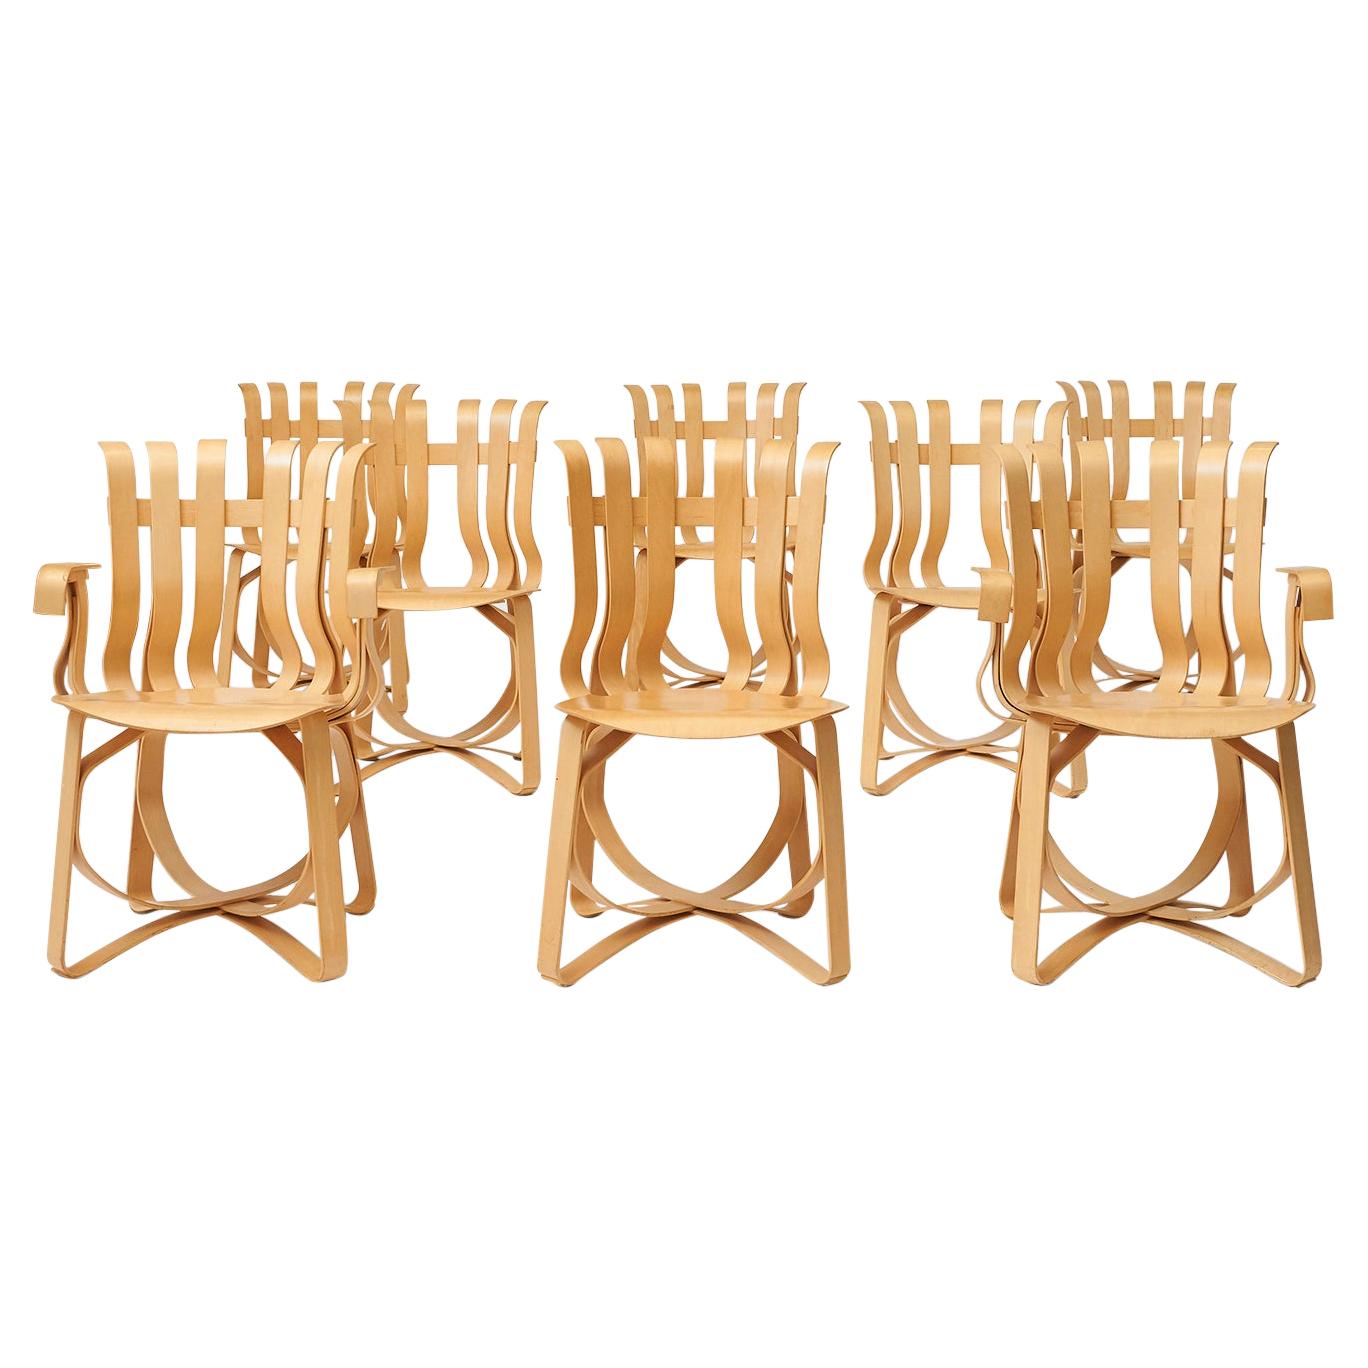 Frank Gehry for Knoll Hat Trick Chairs, Three Available at 1stDibs